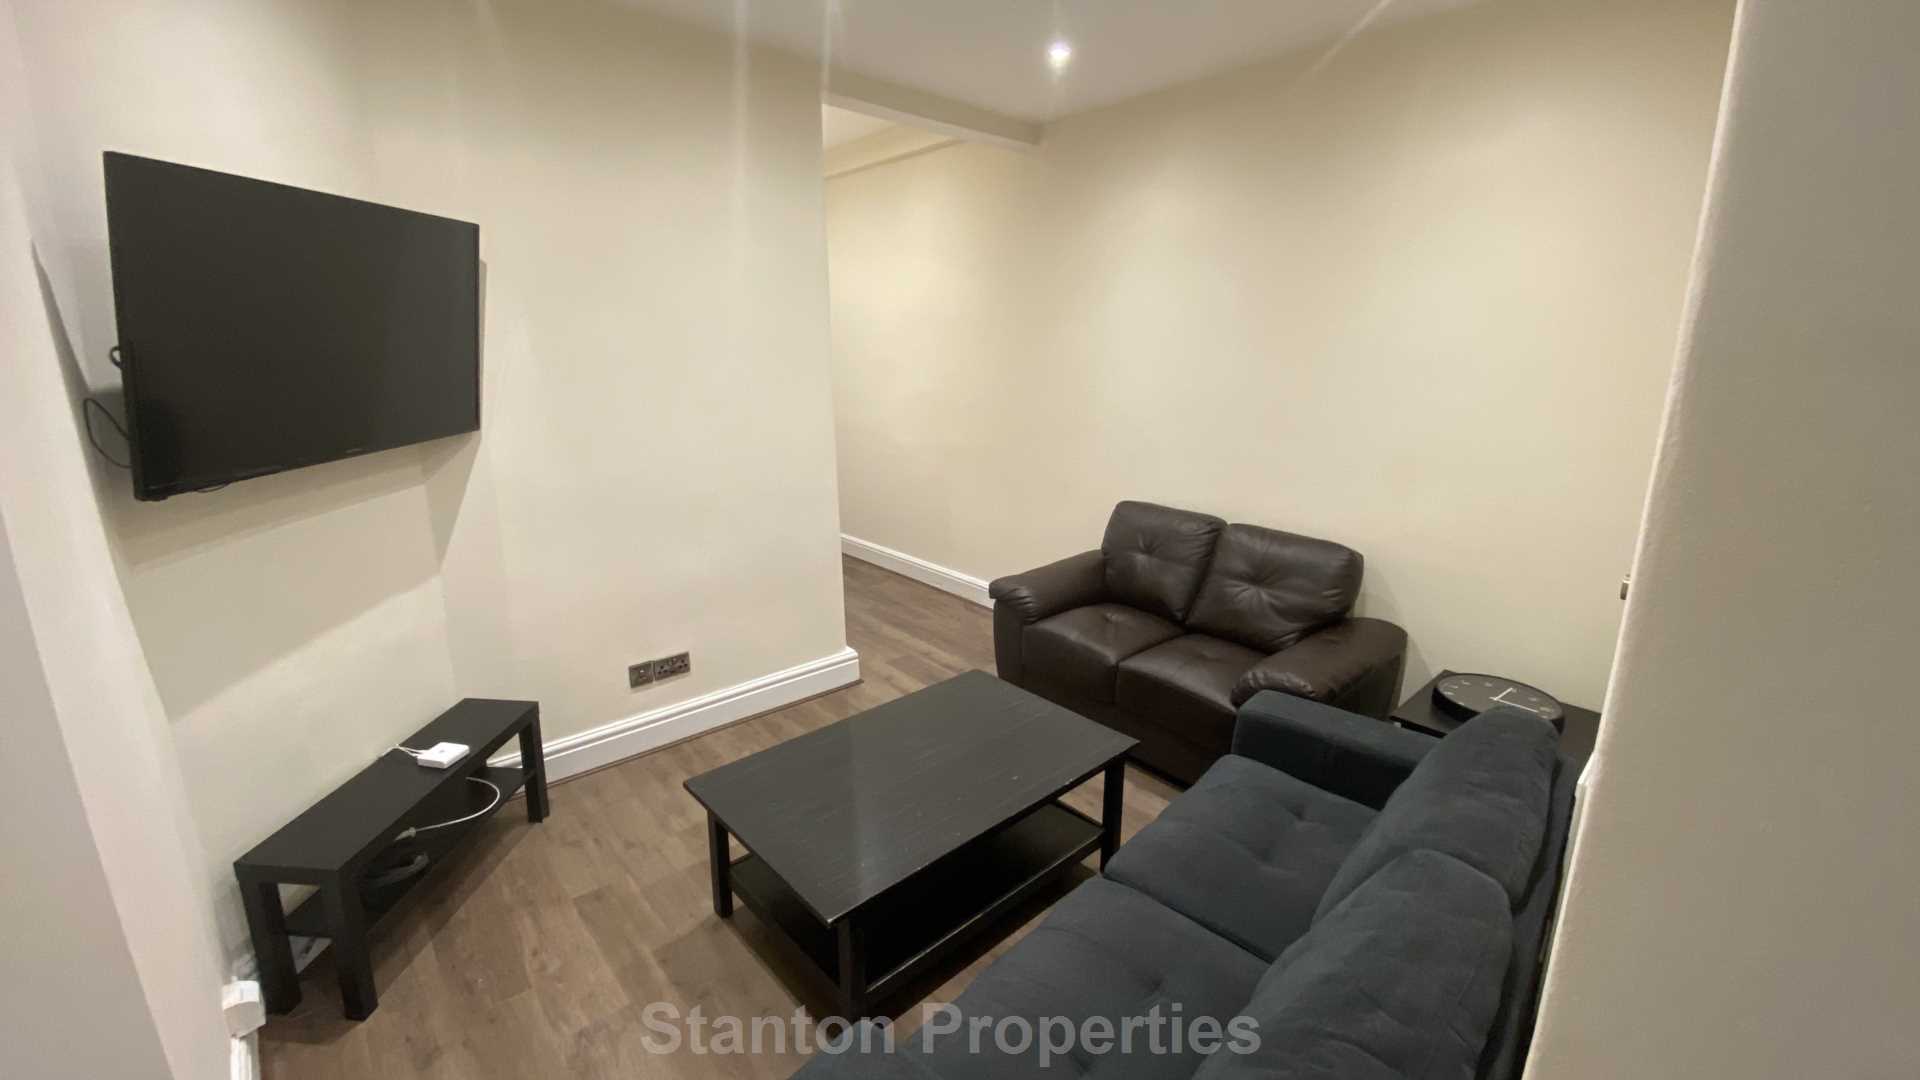 £130 pppw, Moseley Road, Fallowfield, M14 6NR, Image 5